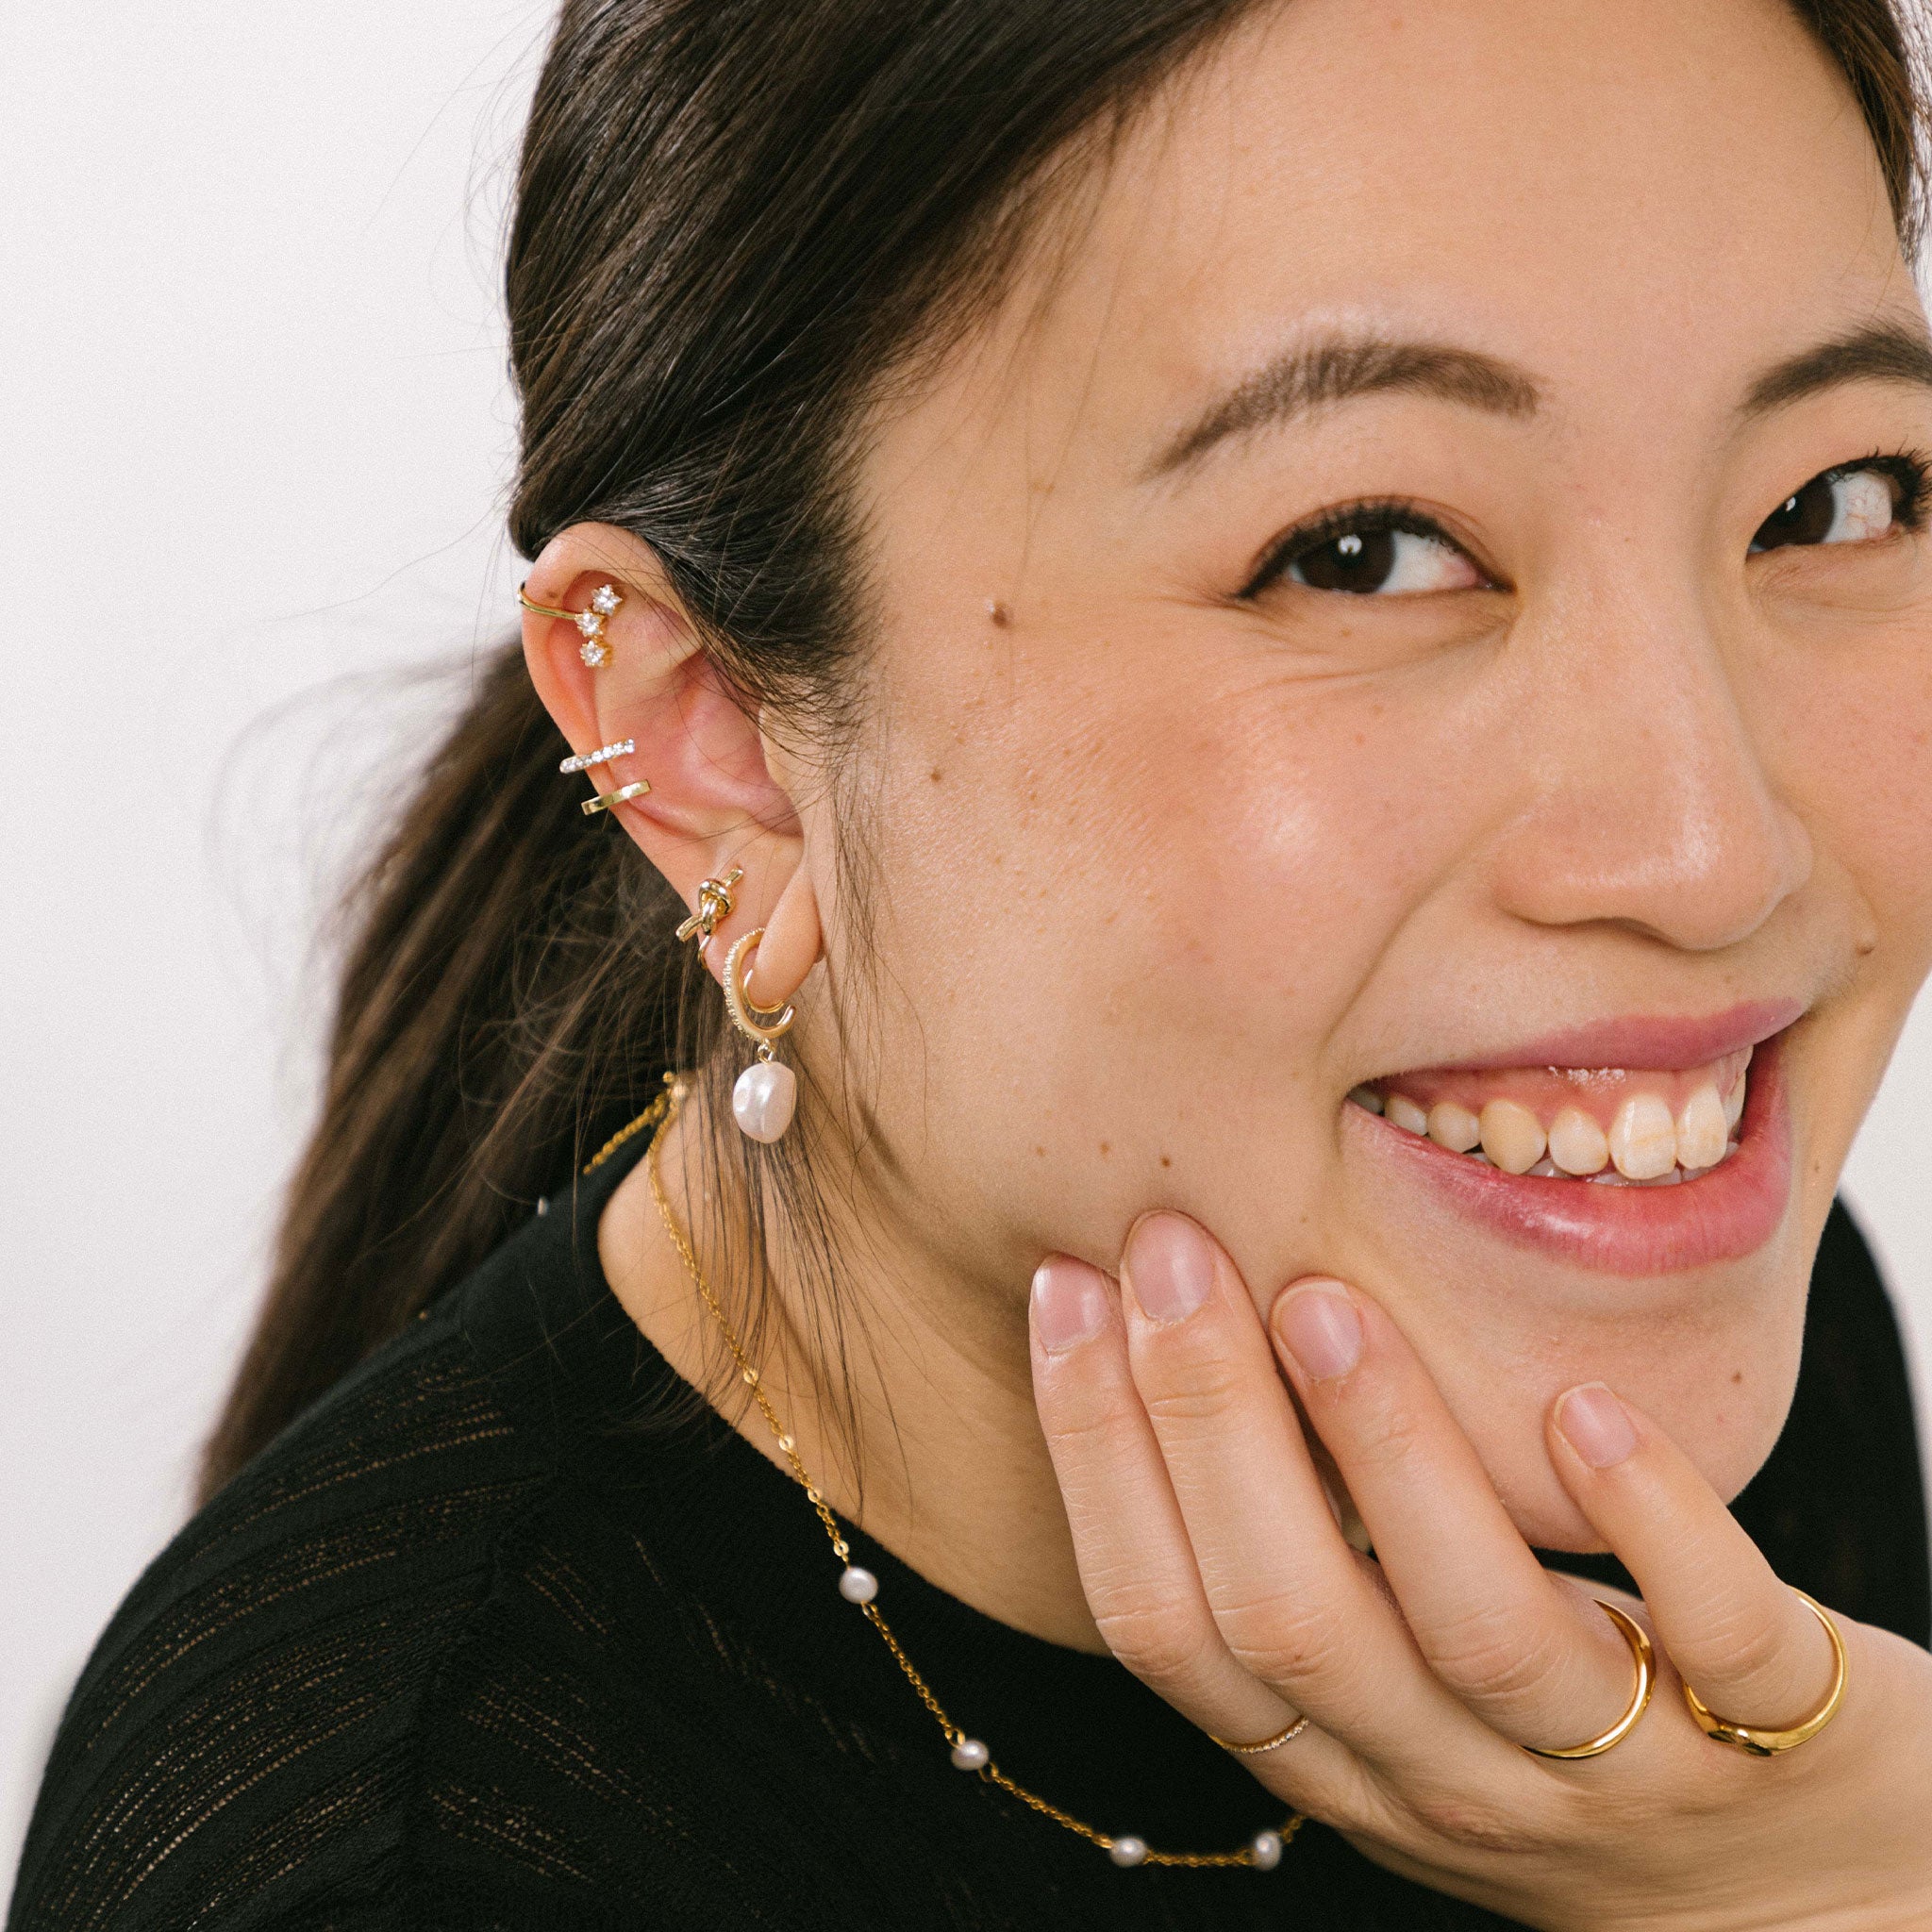 A model wearing the Pearl Pavé Huggie Clip-On Earrings in Gold offer a secure yet adjustable hold with an average comfortable wear duration of 24 hours. Featuring high-quality Freshwater Pearls and 18K Gold Plated Stainless Steel, these earrings are ideal for all ear types and sizes. Each piece may vary slightly in size and color.